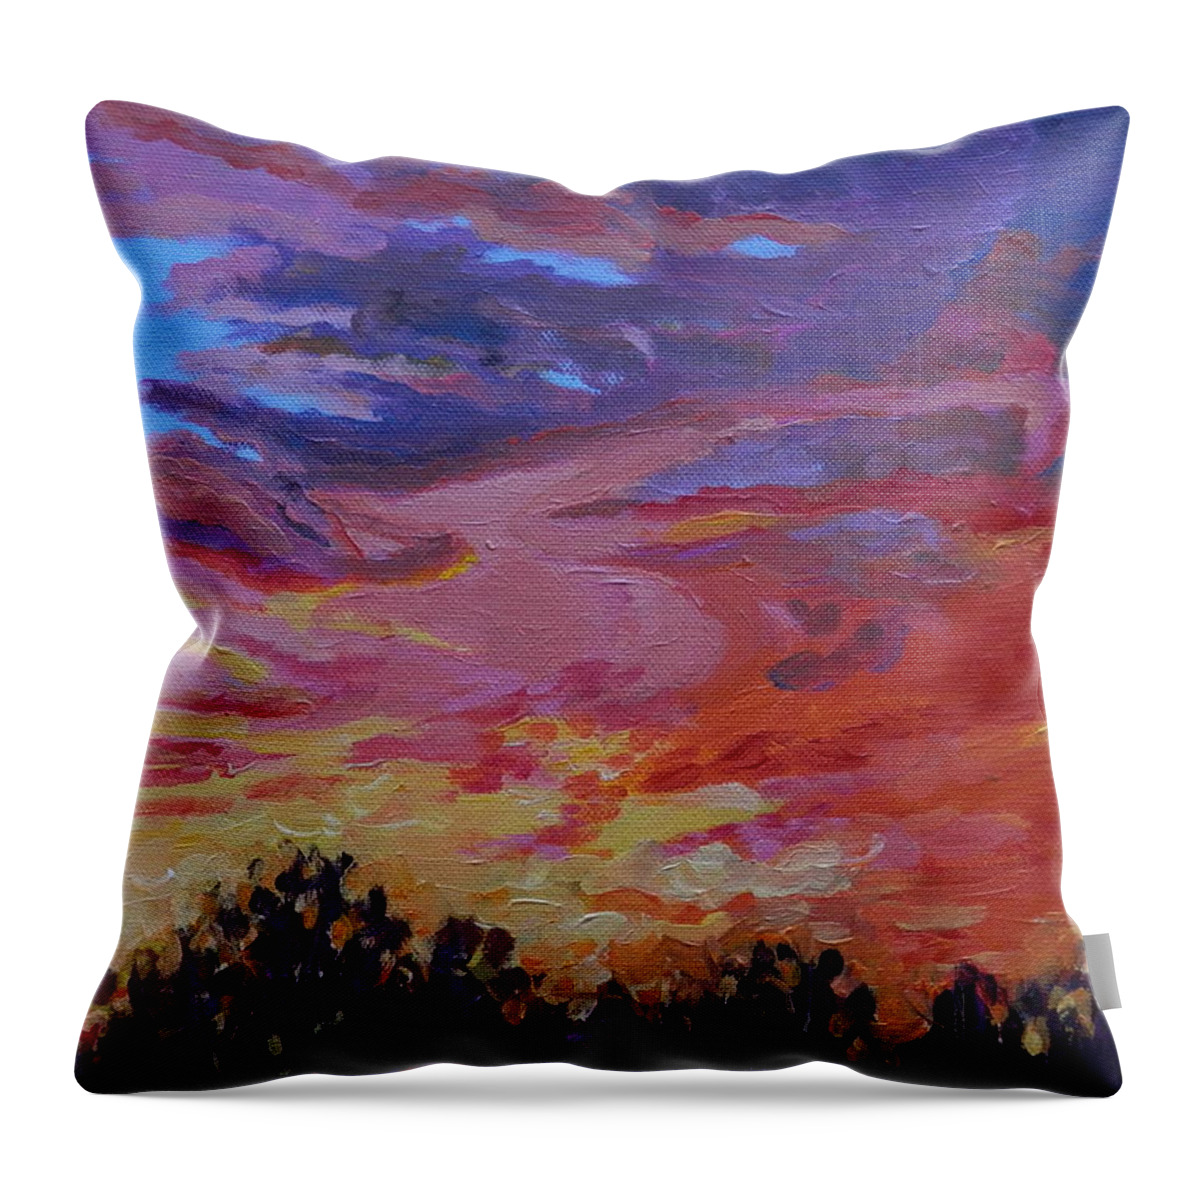 Sunset Throw Pillow featuring the painting Sunset Tattnall by Martha Tisdale